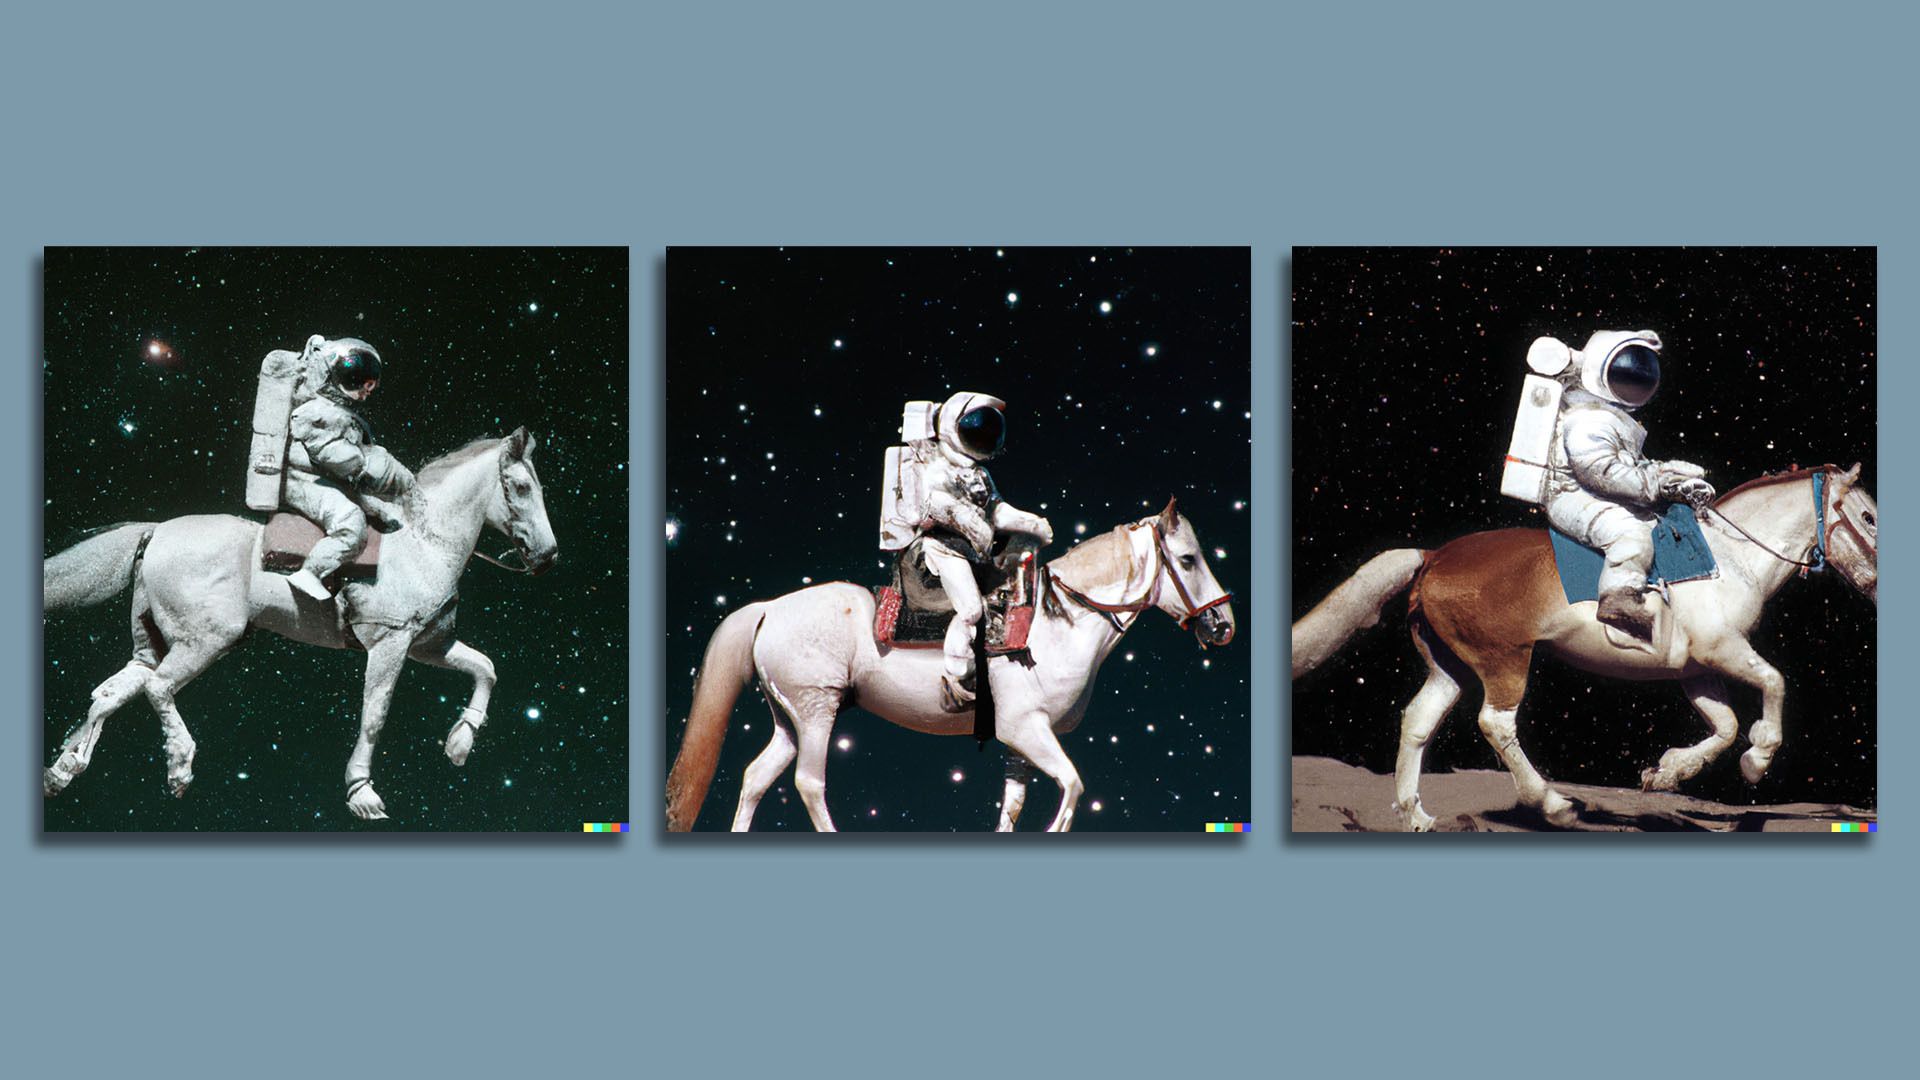 Images of astronauts on horseback generated by AI DALL-E 2